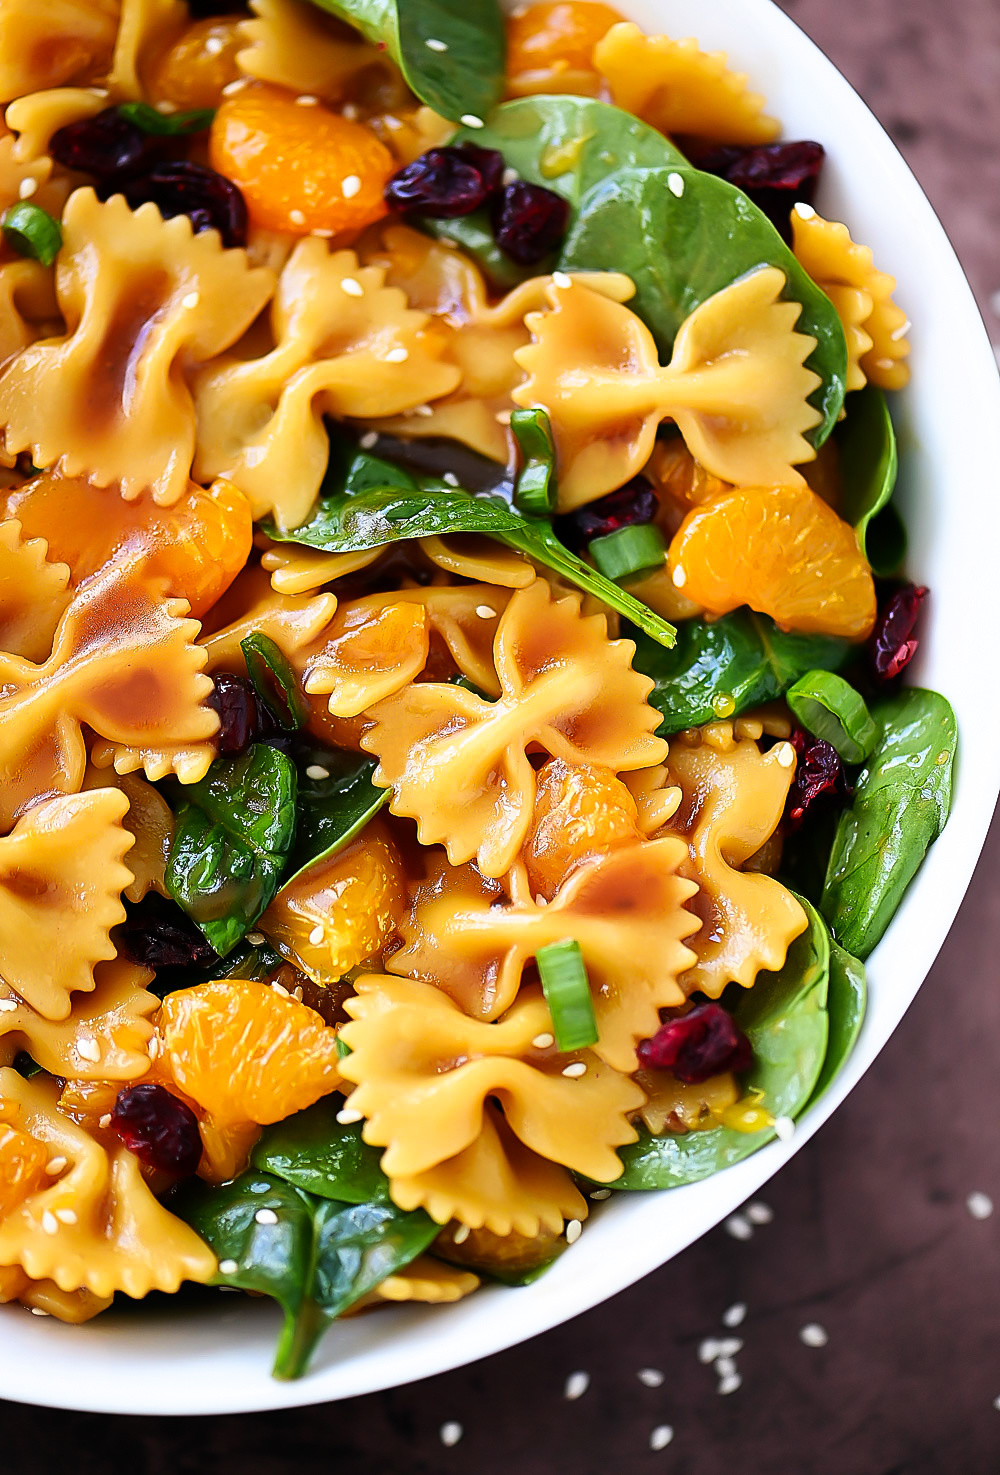 Mandarin Orange and Spinach Pasta Salad is bow tie pasta noodles coated in teriyaki sauce with oranges, spinach and dried cranberries. Life-in-the-Lofthouse.com